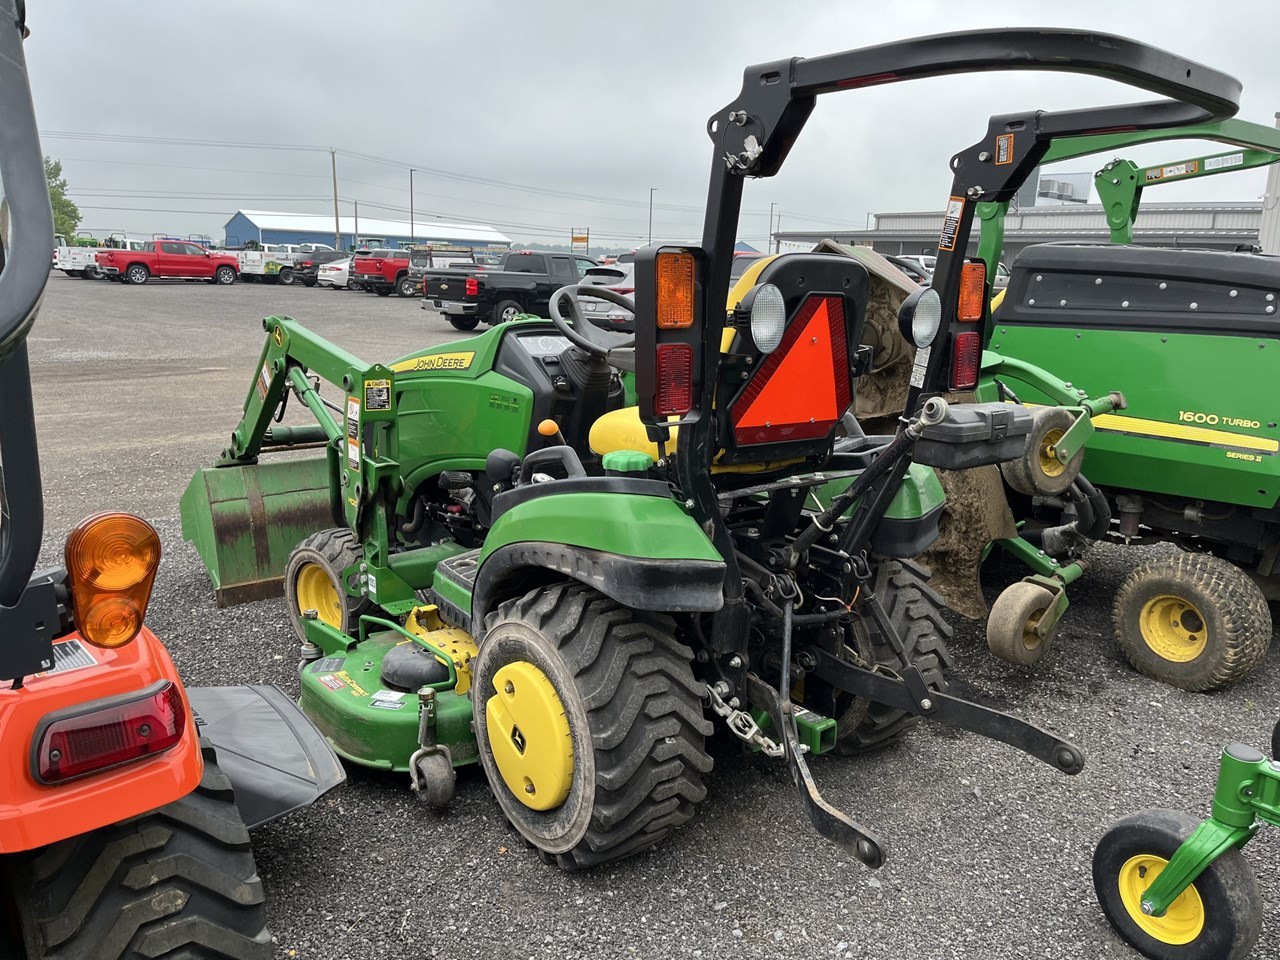 2014 John Deere 1025R Tractor - Compact Utility For Sale